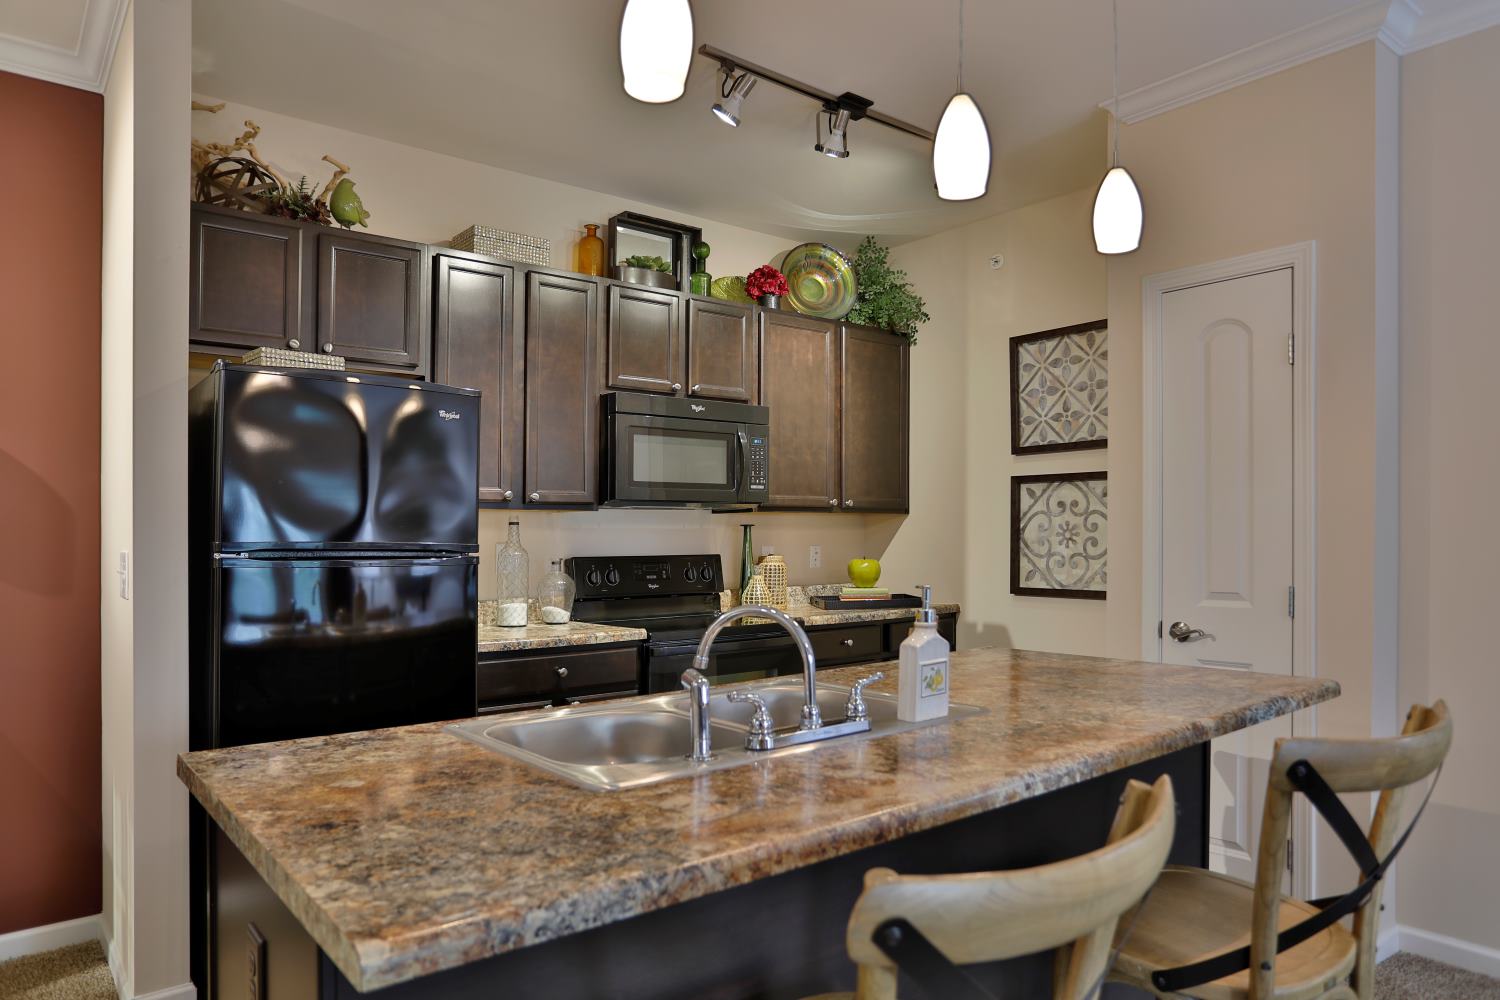 An interior view of a Brinley Place apartment home's kitchen and dining area.